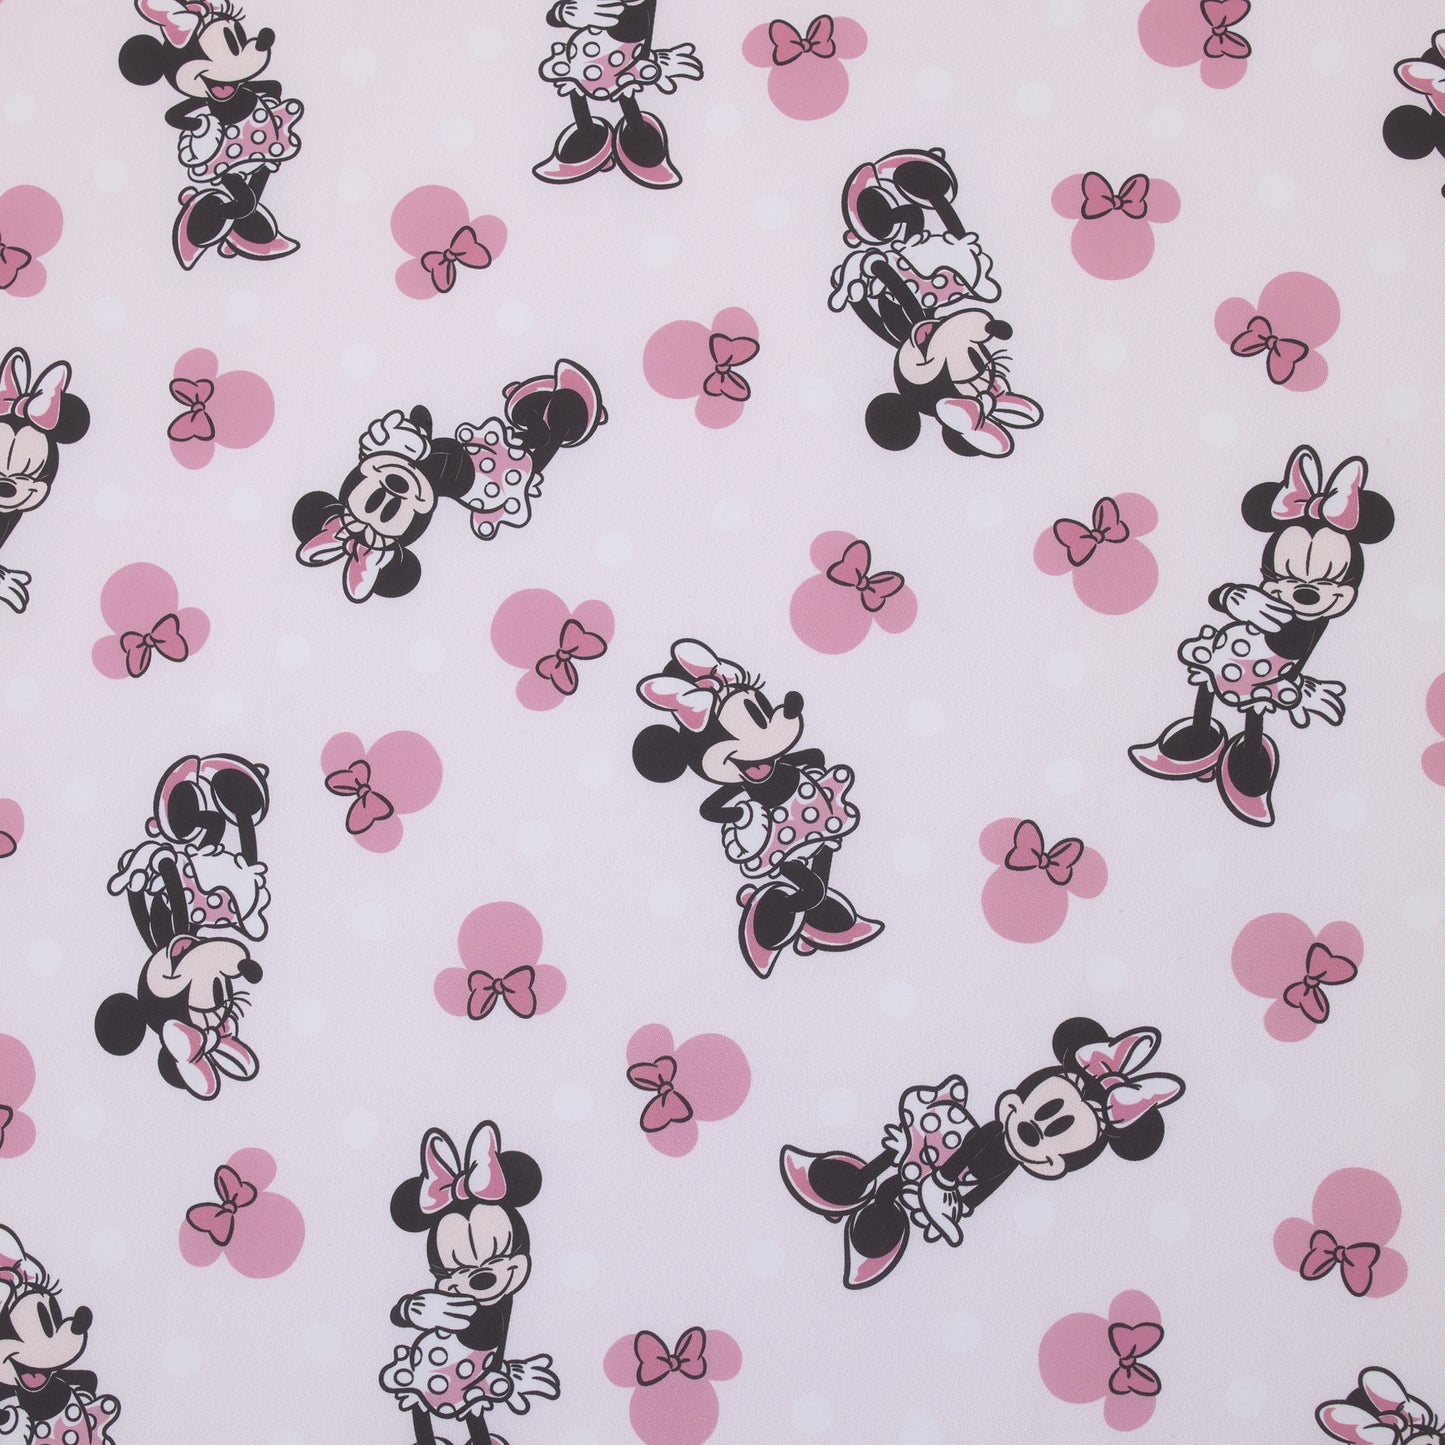 Disney Minnie Mouse Pink, Black, and White  Super Soft Nursery Fitted Mini Crib Sheet